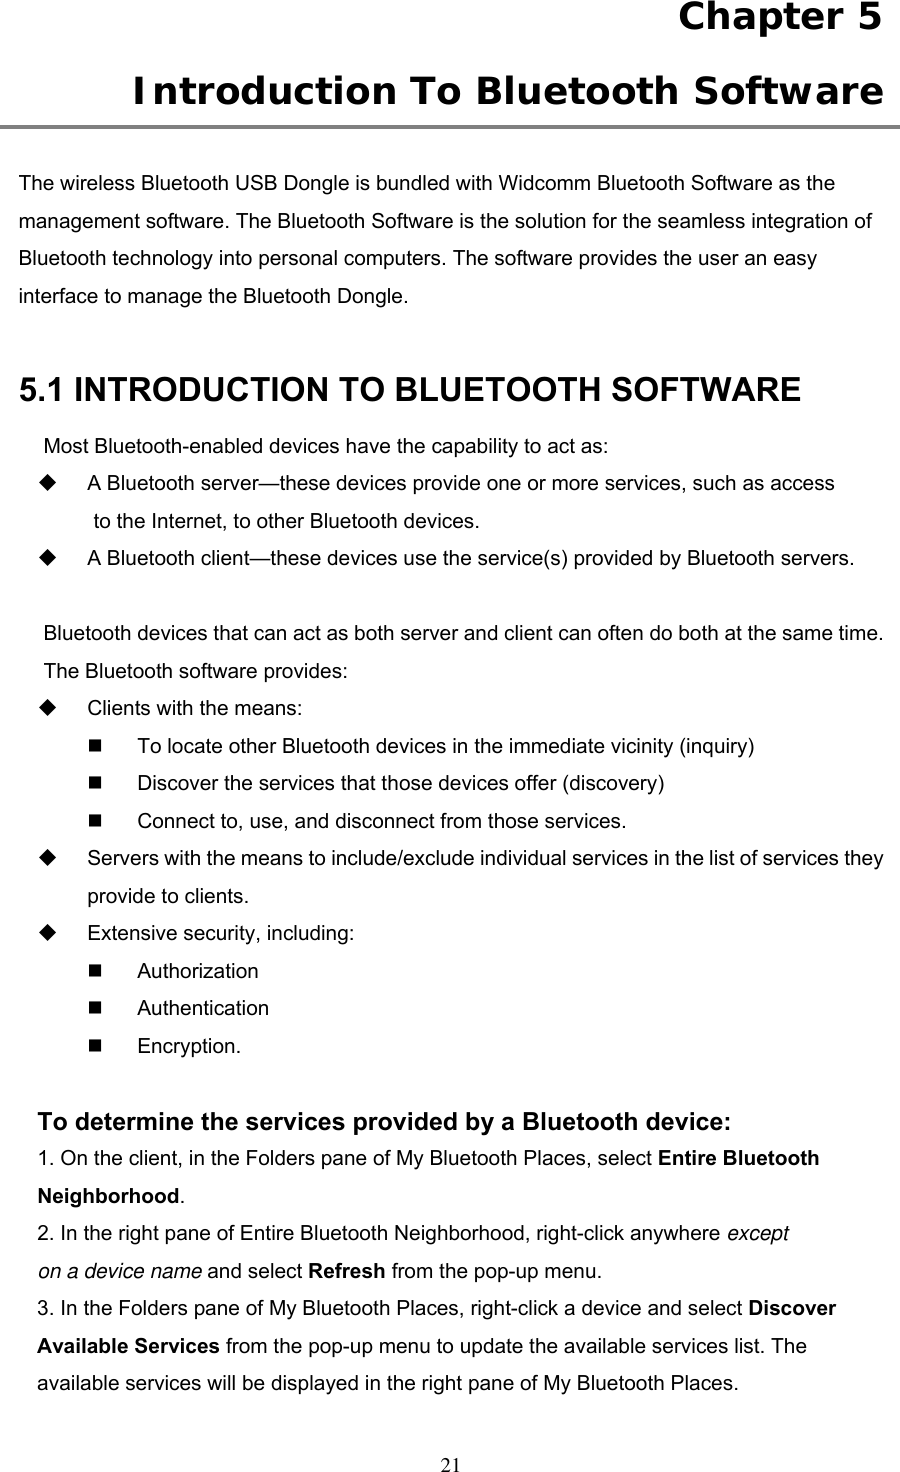 Chapter 5  Introduction To Bluetooth Software  The wireless Bluetooth USB Dongle is bundled with Widcomm Bluetooth Software as the management software. The Bluetooth Software is the solution for the seamless integration of Bluetooth technology into personal computers. The software provides the user an easy interface to manage the Bluetooth Dongle.    5.1 INTRODUCTION TO BLUETOOTH SOFTWARE Most Bluetooth-enabled devices have the capability to act as:   A Bluetooth server—these devices provide one or more services, such as access to the Internet, to other Bluetooth devices.   A Bluetooth client—these devices use the service(s) provided by Bluetooth servers.  Bluetooth devices that can act as both server and client can often do both at the same time. The Bluetooth software provides:   Clients with the means:   To locate other Bluetooth devices in the immediate vicinity (inquiry)   Discover the services that those devices offer (discovery)   Connect to, use, and disconnect from those services.   Servers with the means to include/exclude individual services in the list of services they provide to clients.   Extensive security, including:   Authorization   Authentication   Encryption.  To determine the services provided by a Bluetooth device: 1. On the client, in the Folders pane of My Bluetooth Places, select Entire Bluetooth Neighborhood. 2. In the right pane of Entire Bluetooth Neighborhood, right-click anywhere except on a device name and select Refresh from the pop-up menu. 3. In the Folders pane of My Bluetooth Places, right-click a device and select Discover Available Services from the pop-up menu to update the available services list. The available services will be displayed in the right pane of My Bluetooth Places.  21 